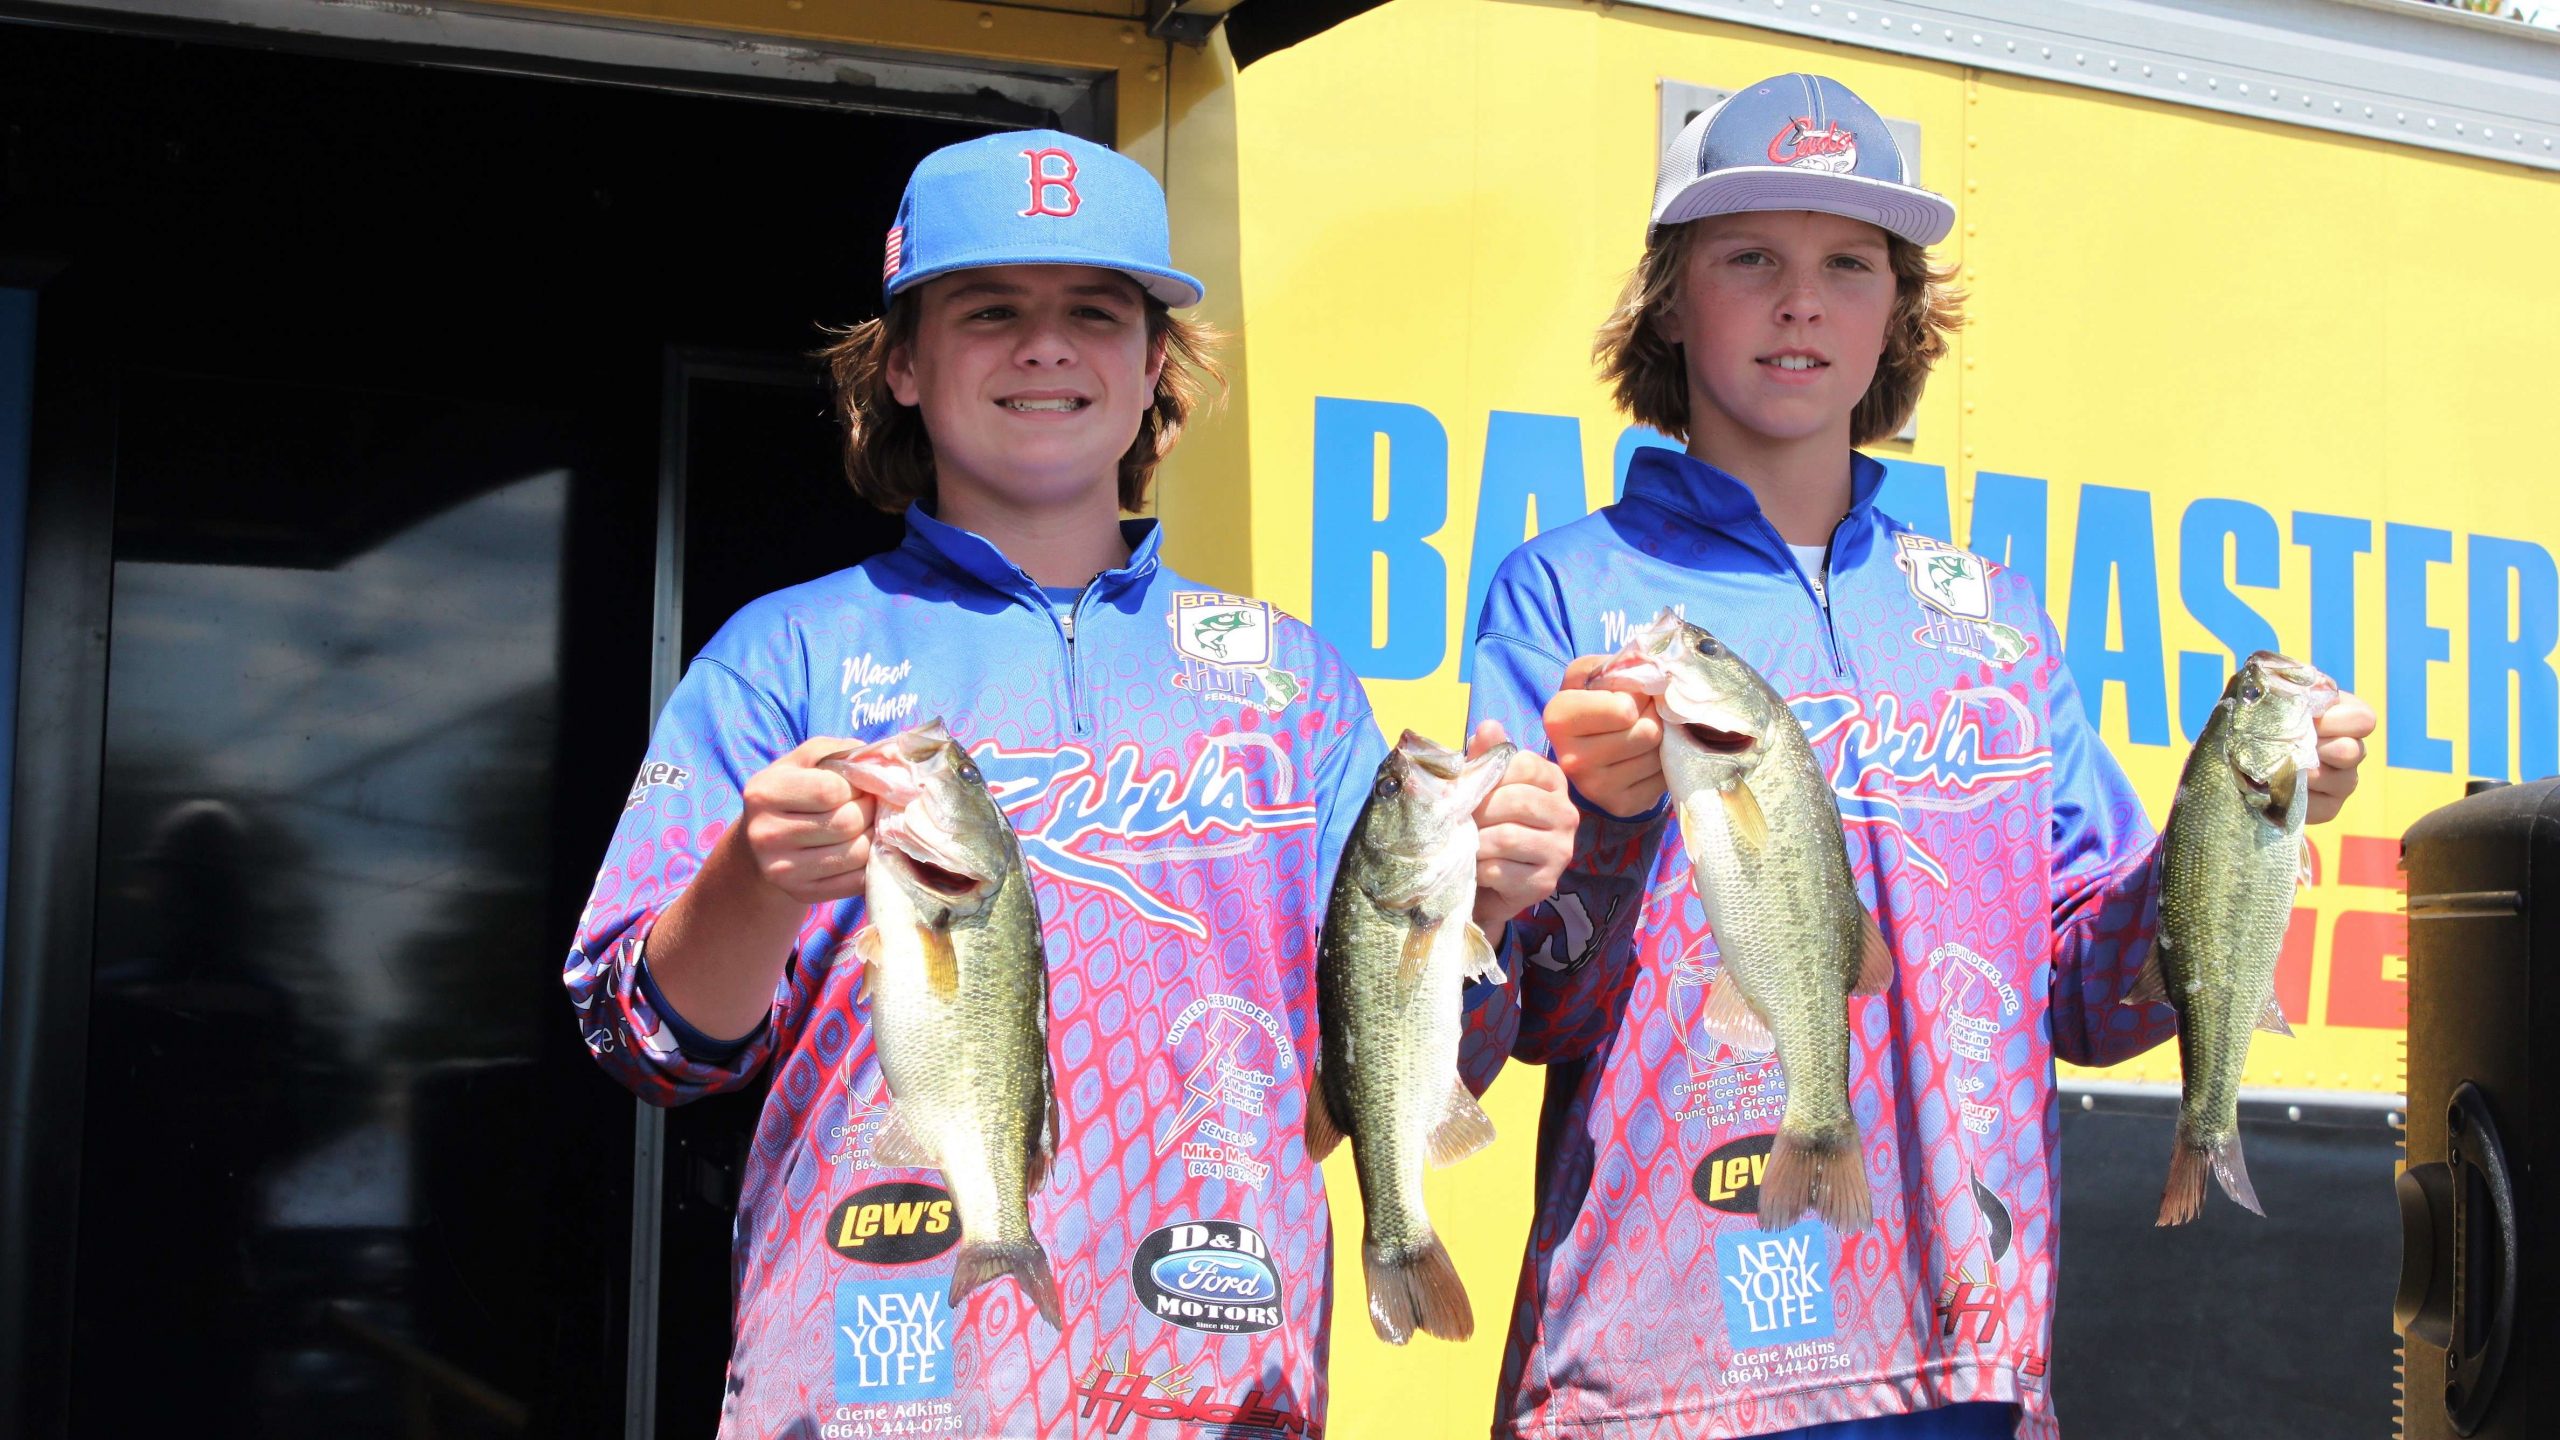  Marshal Robinson and Mason Fulmer of South Carolina are in 15th place with 6-7.
